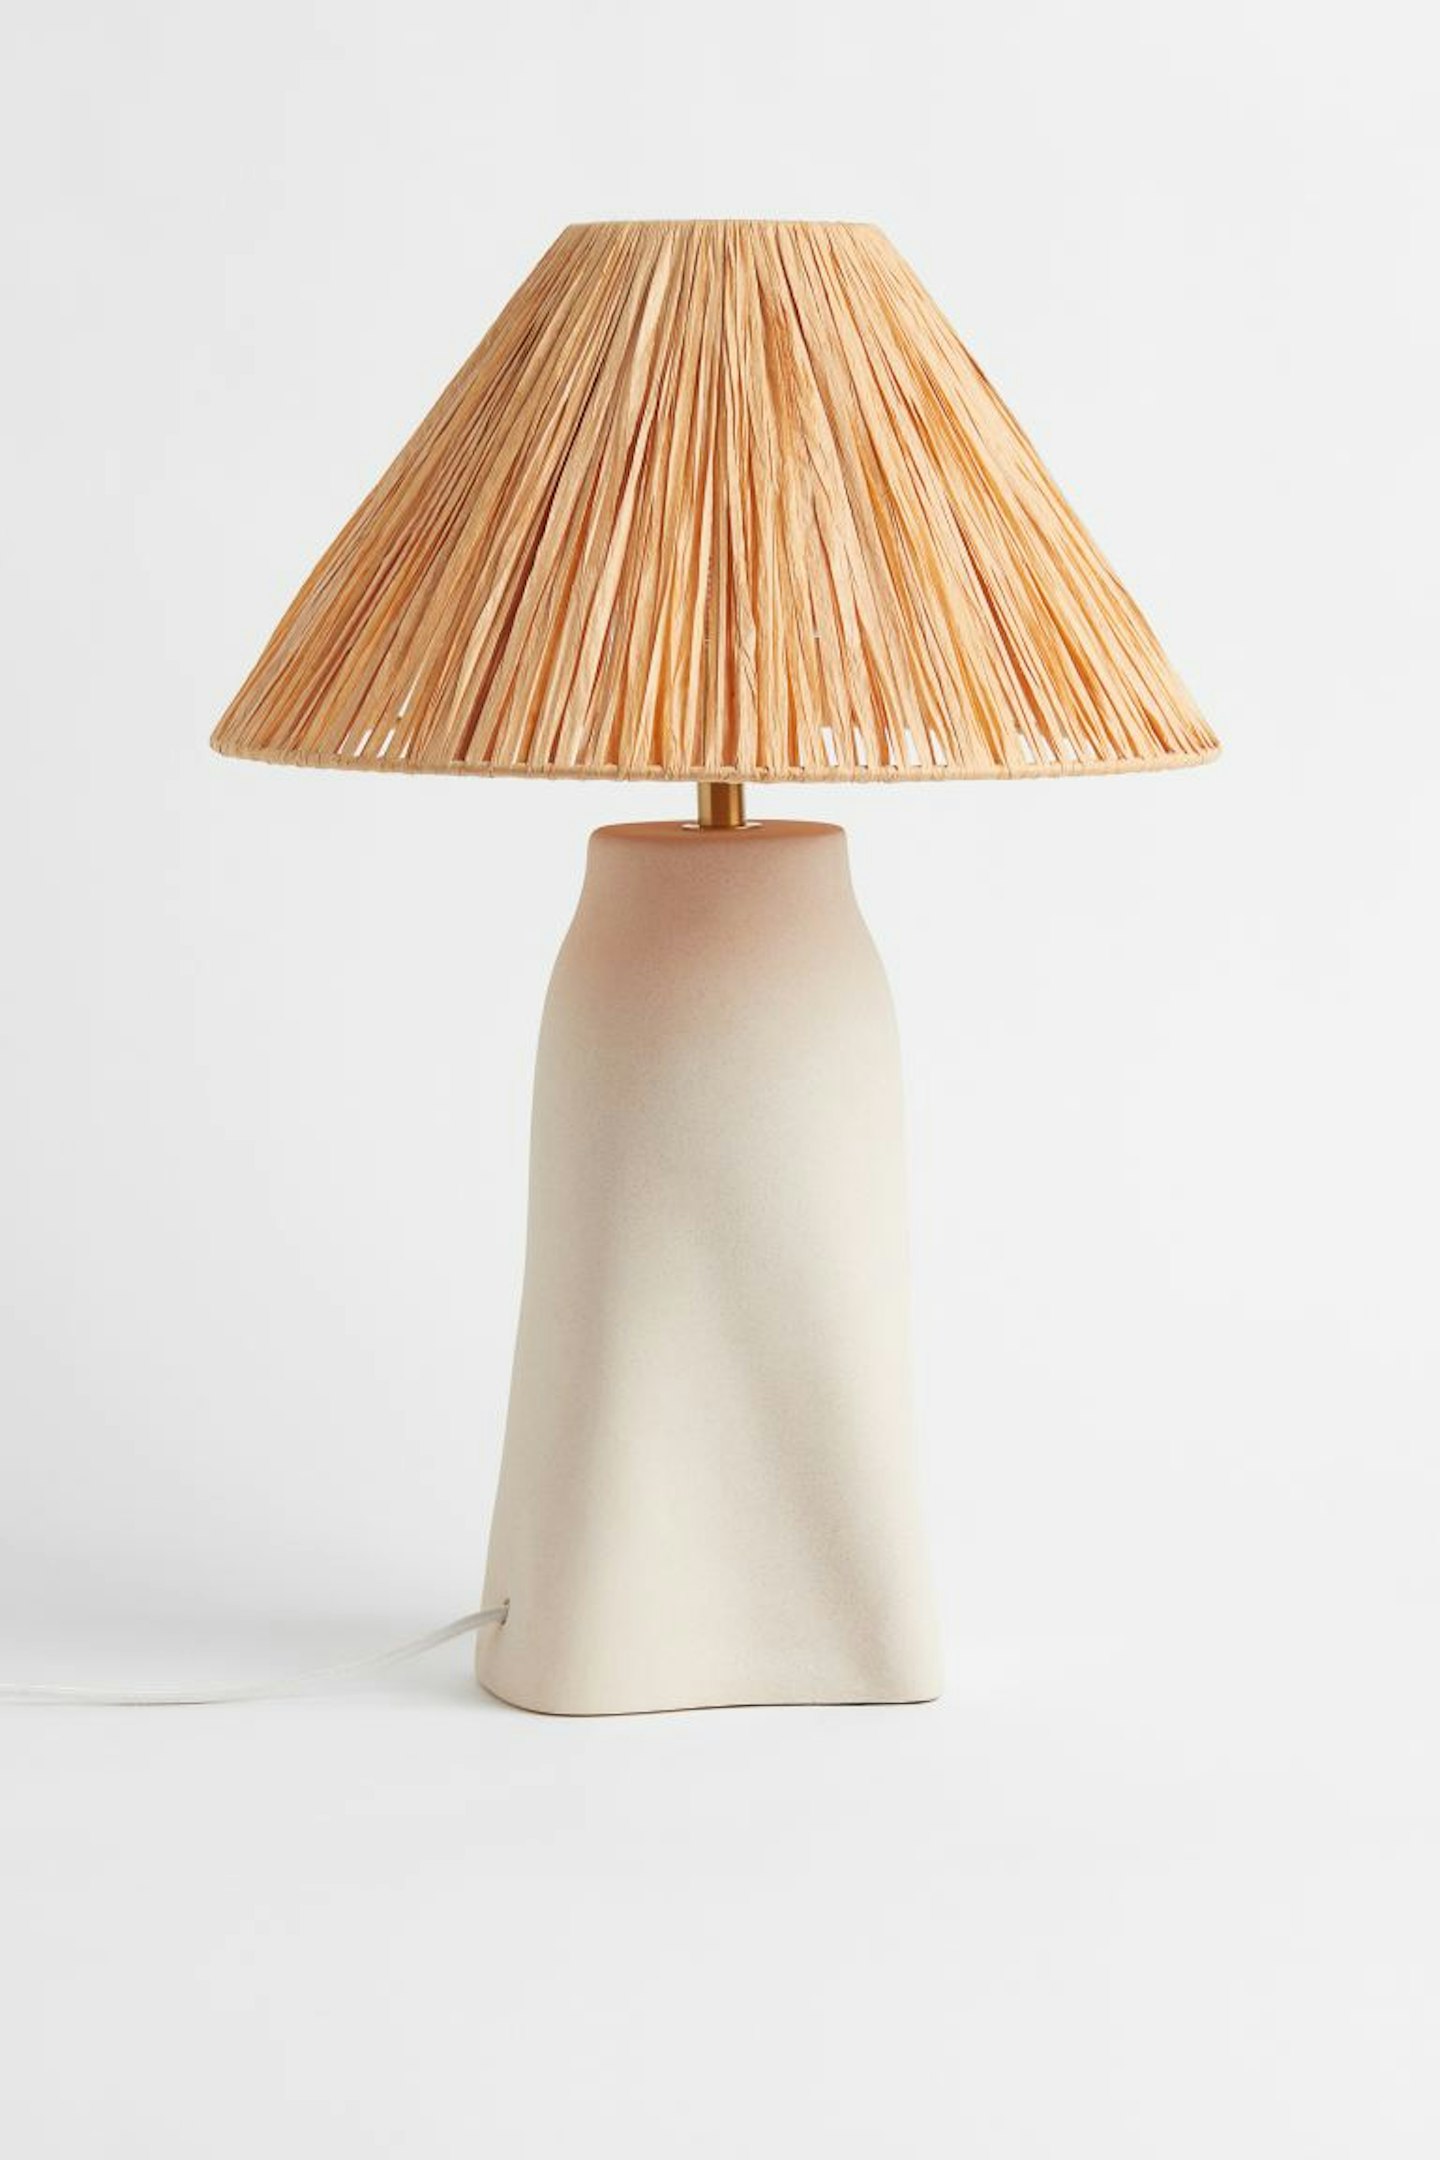 H&M, Small paper straw lamp shade, £29.99